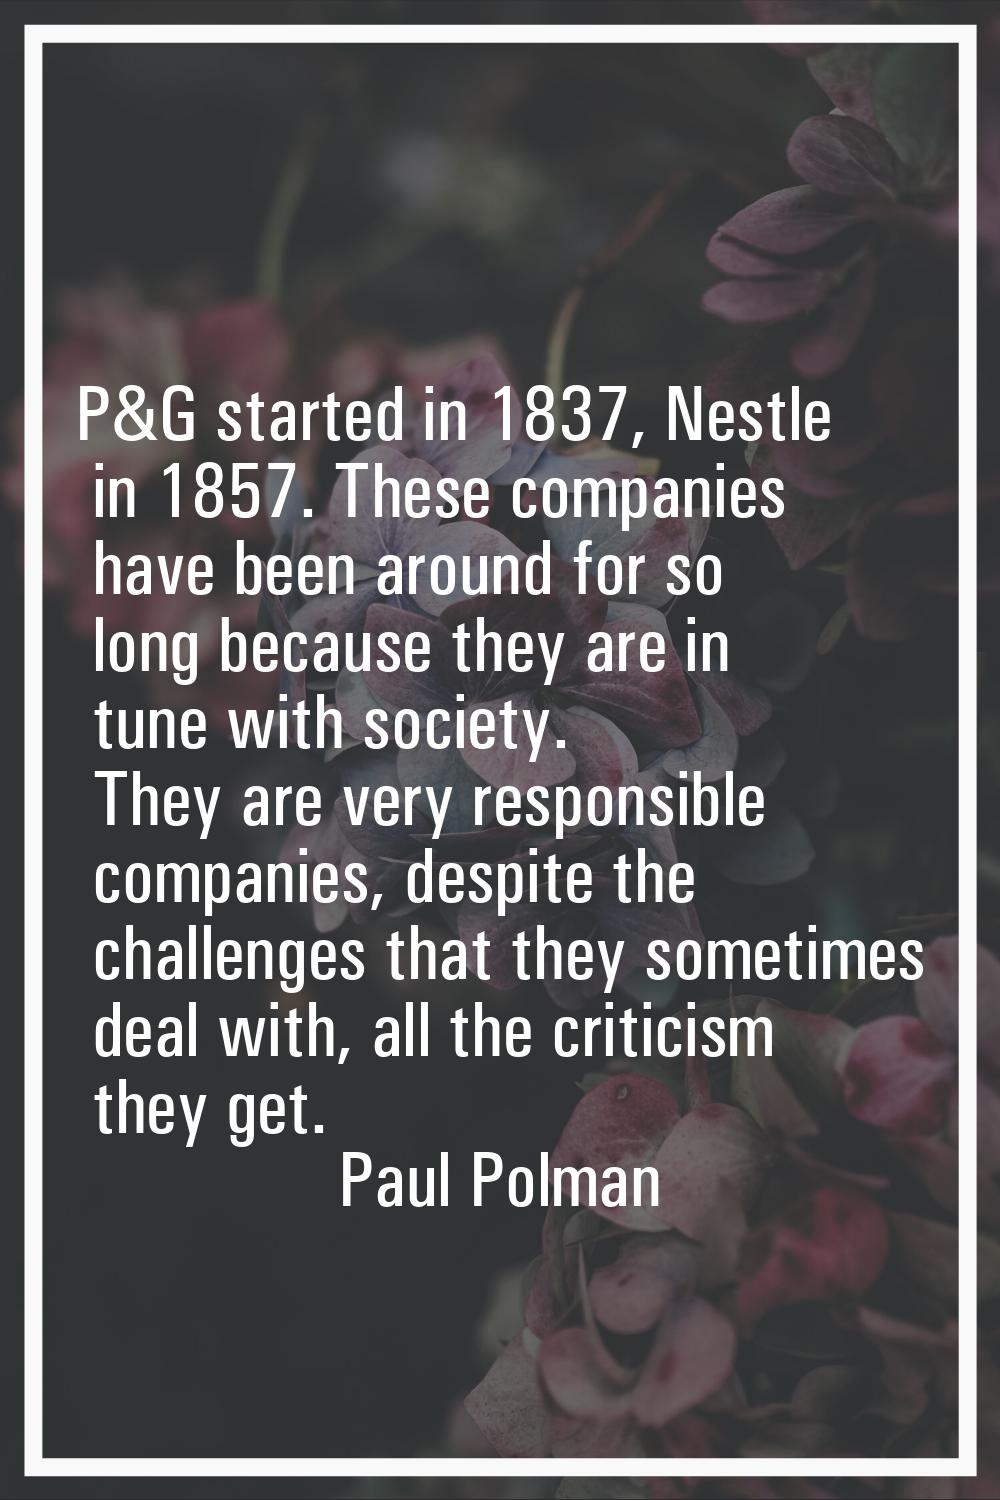 P&G started in 1837, Nestle in 1857. These companies have been around for so long because they are 